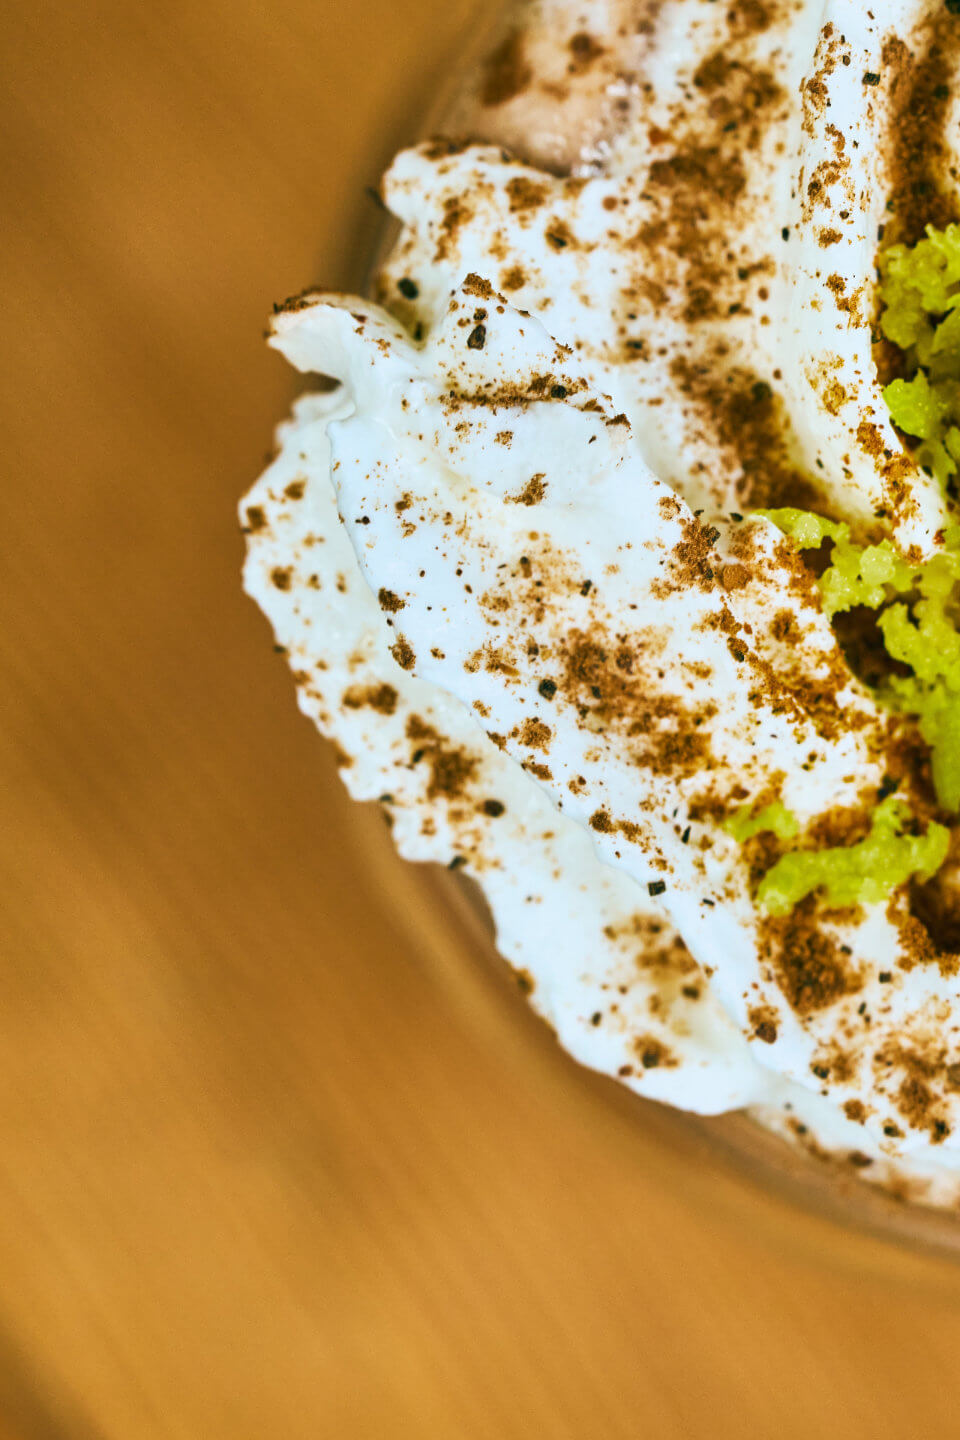 A coffee featuring fluffy white whipped cream sprinkled with brown spices, with a layer of green crumbles beneath, all presented on a beige surface.